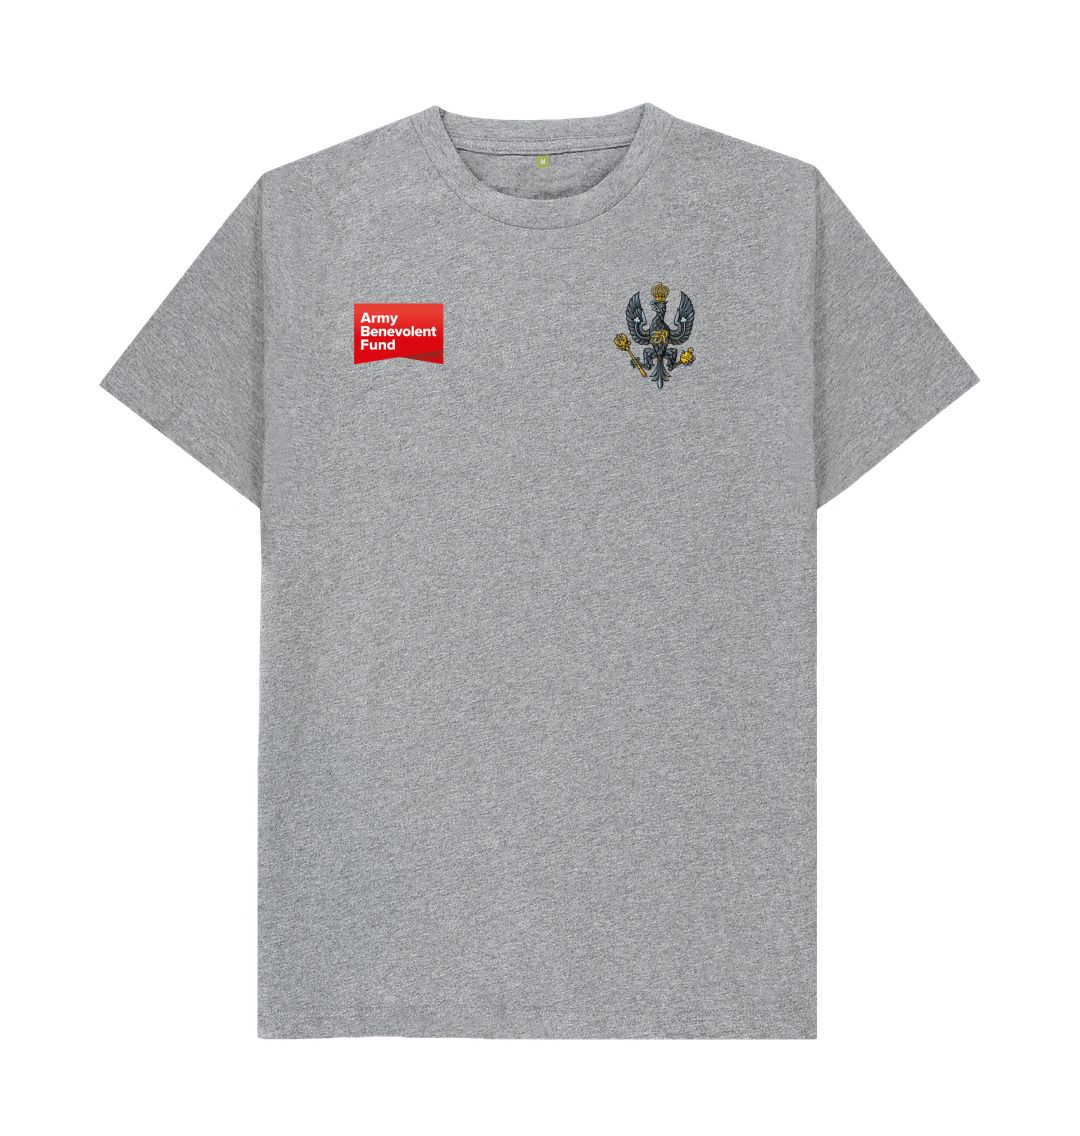 The King's Royal Hussars Unisex T-shirt - Army Benevolent Fund